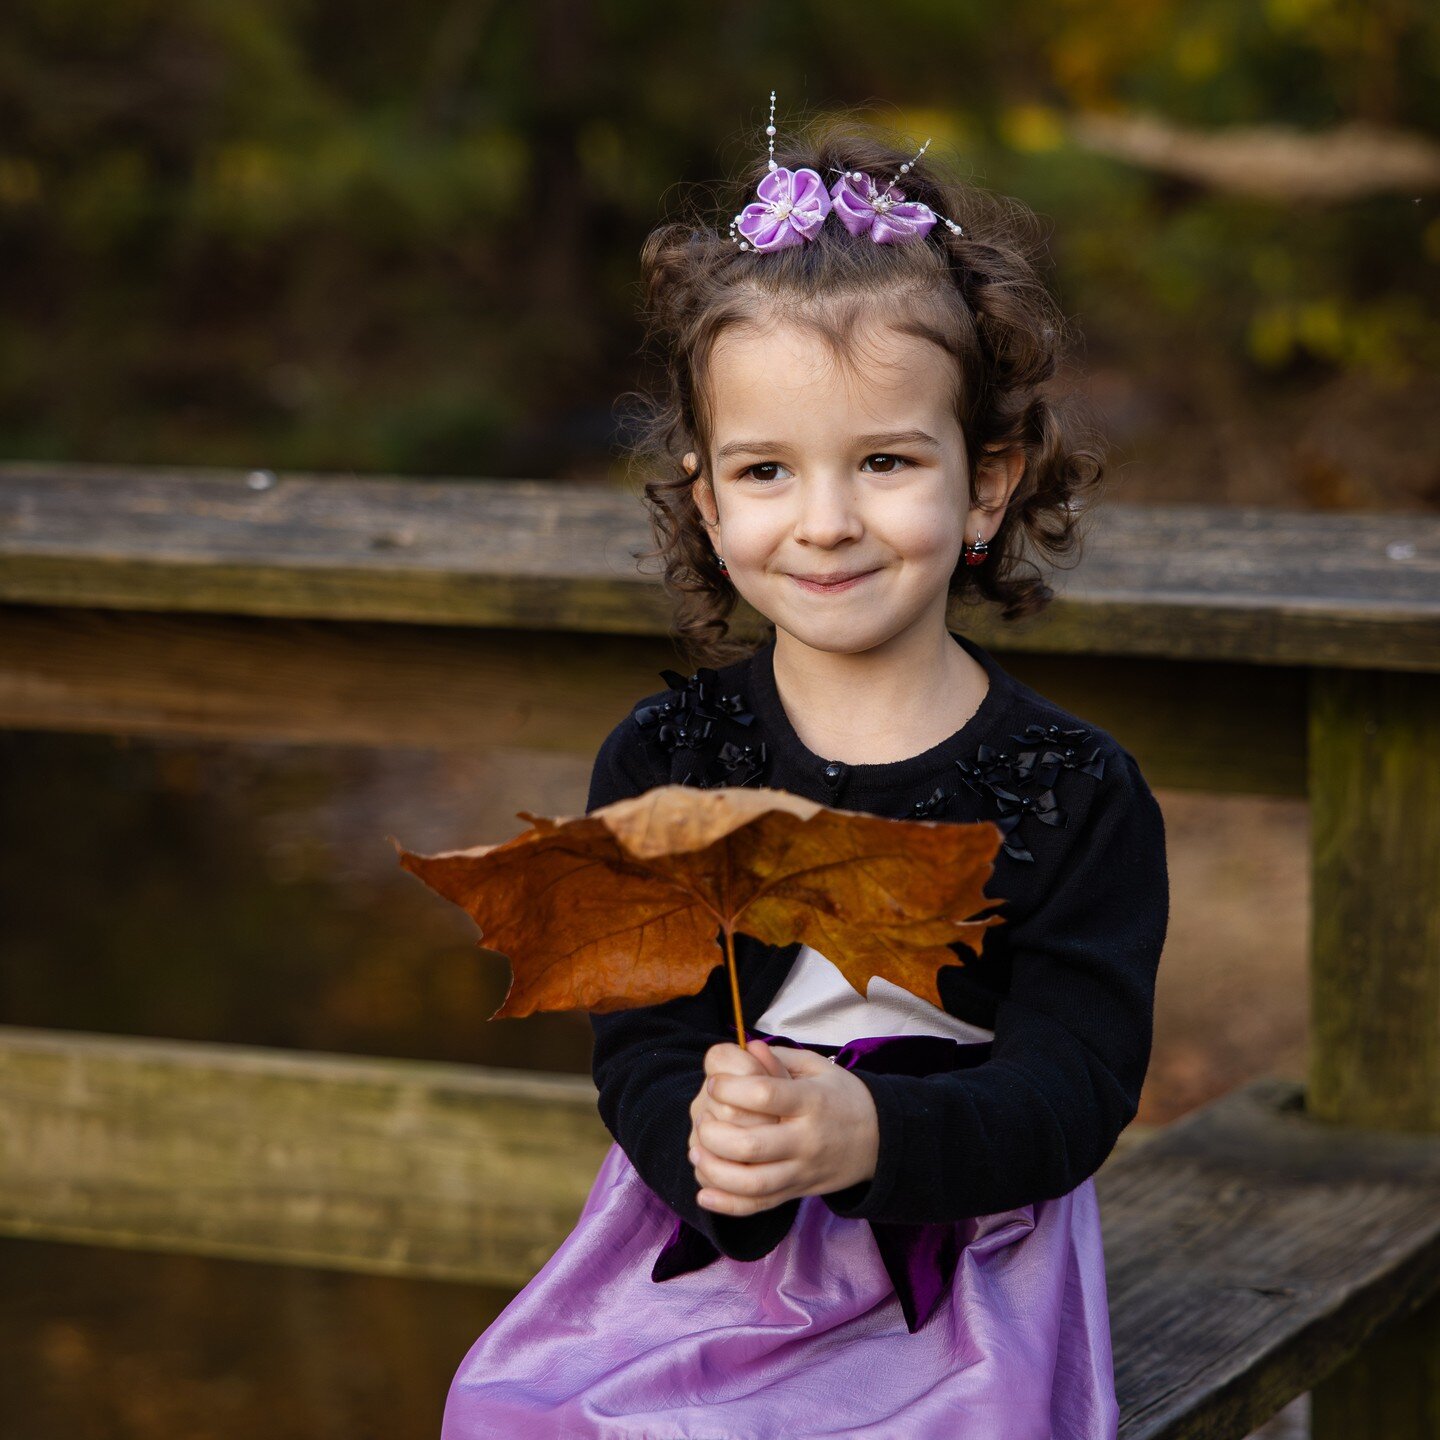 When the leaves start falling down, we all try to get the last of the colors and sun. Backgrounds start looking like paintings, and the golden sun softens the looks. I could not have wished for better weather for this session and my clients. Always l